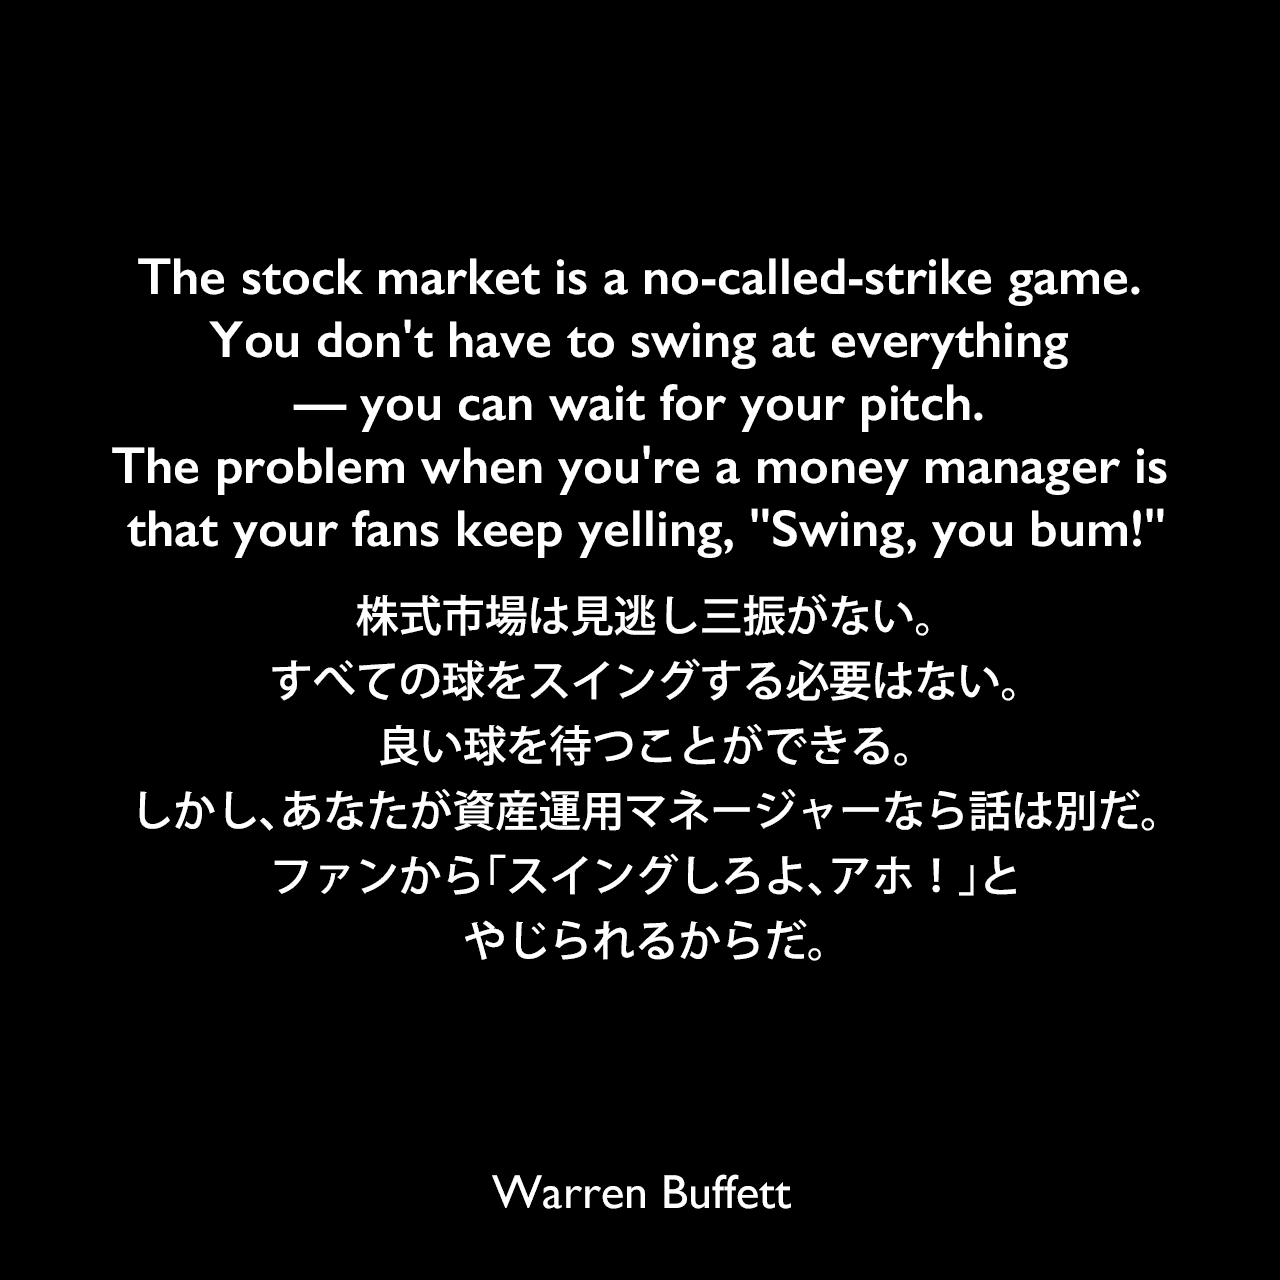 The stock market is a no-called-strike game. You don't have to swing at everything — you can wait for your pitch. The problem when you're a money manager is that your fans keep yelling, 'Swing, you bum!'株式市場は見逃し三振がない。すべての球をスイングする必要はない。良い球を待つことができる。しかし、あなたが資産運用マネージャーなら話は別だ。ファンから「スイングしろよ、アホ！」とやじられるからだ。Warren Buffett